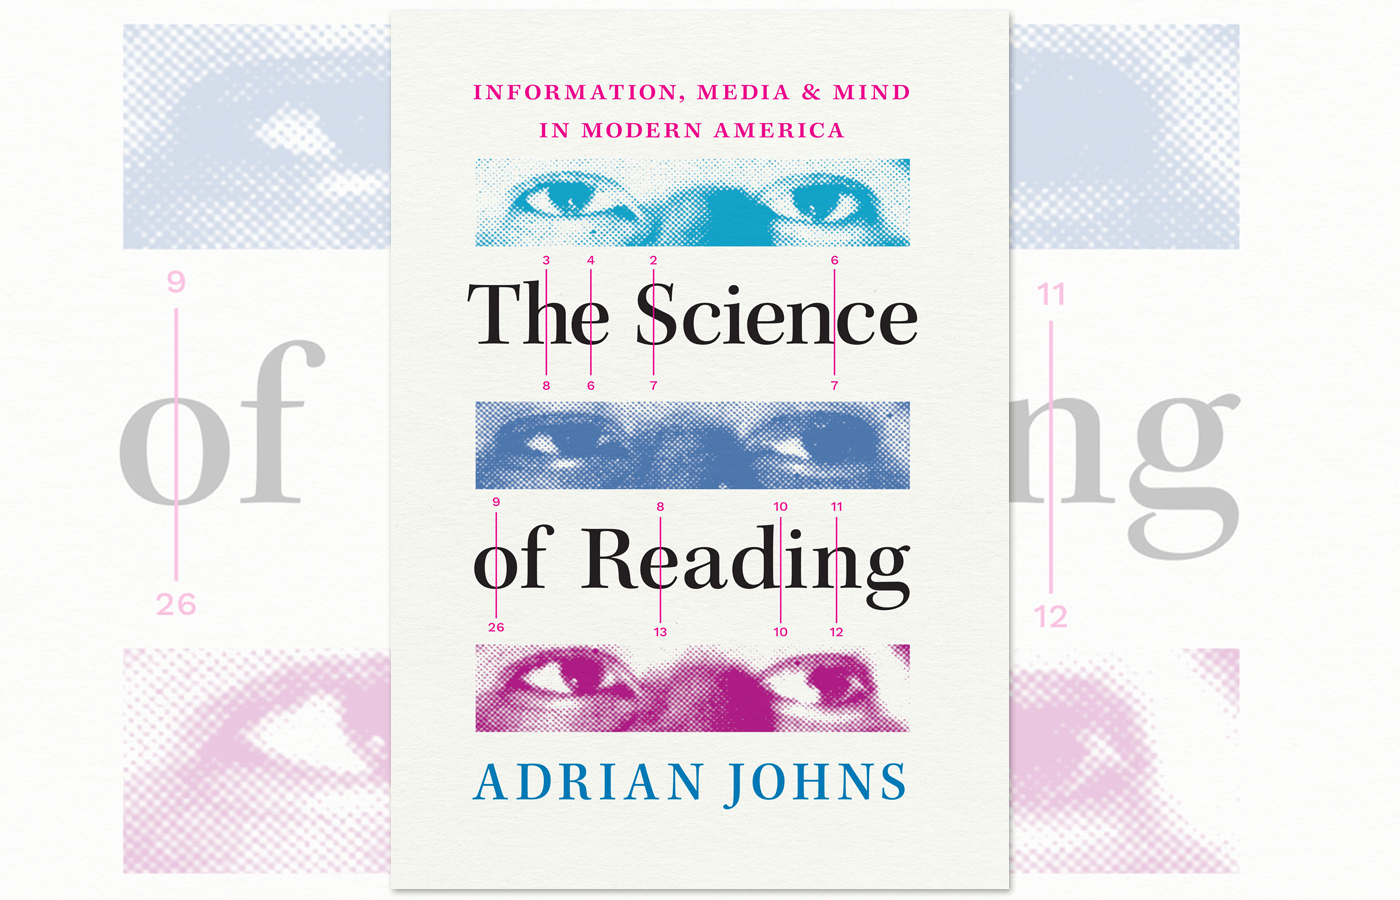 Book cover of "The Science of Reading" by Adrian Johns